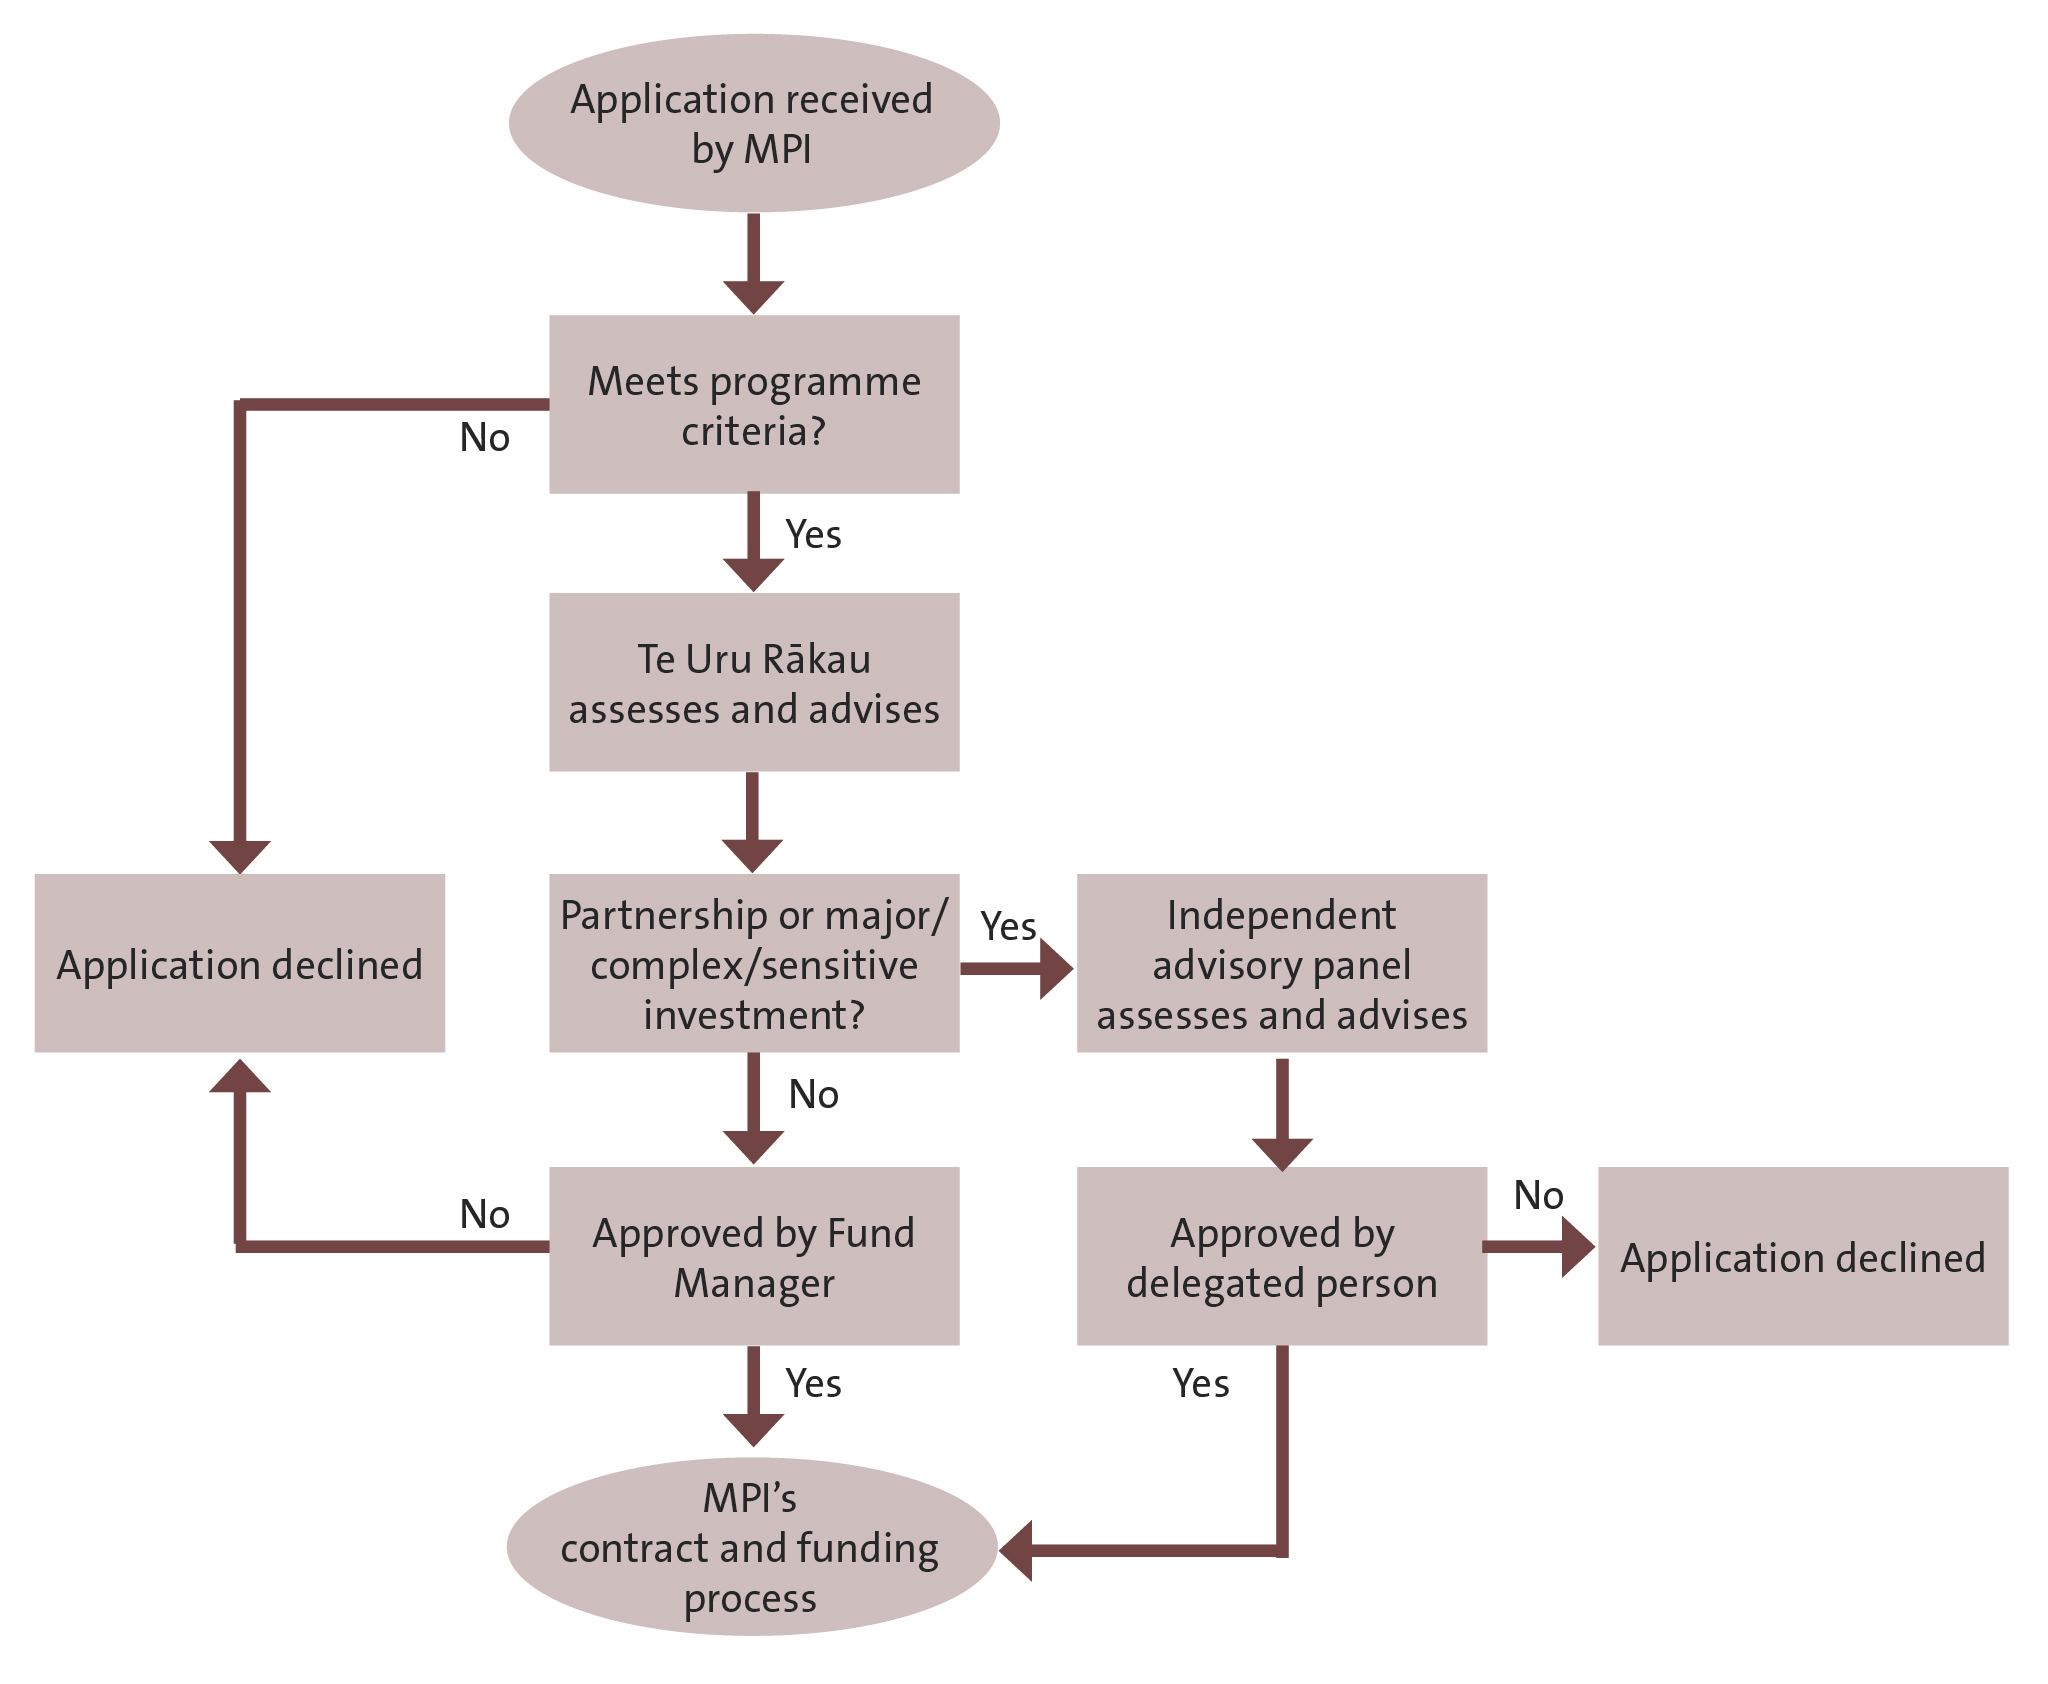 Figure 5 - How the Ministry for Primary Industries processes applications